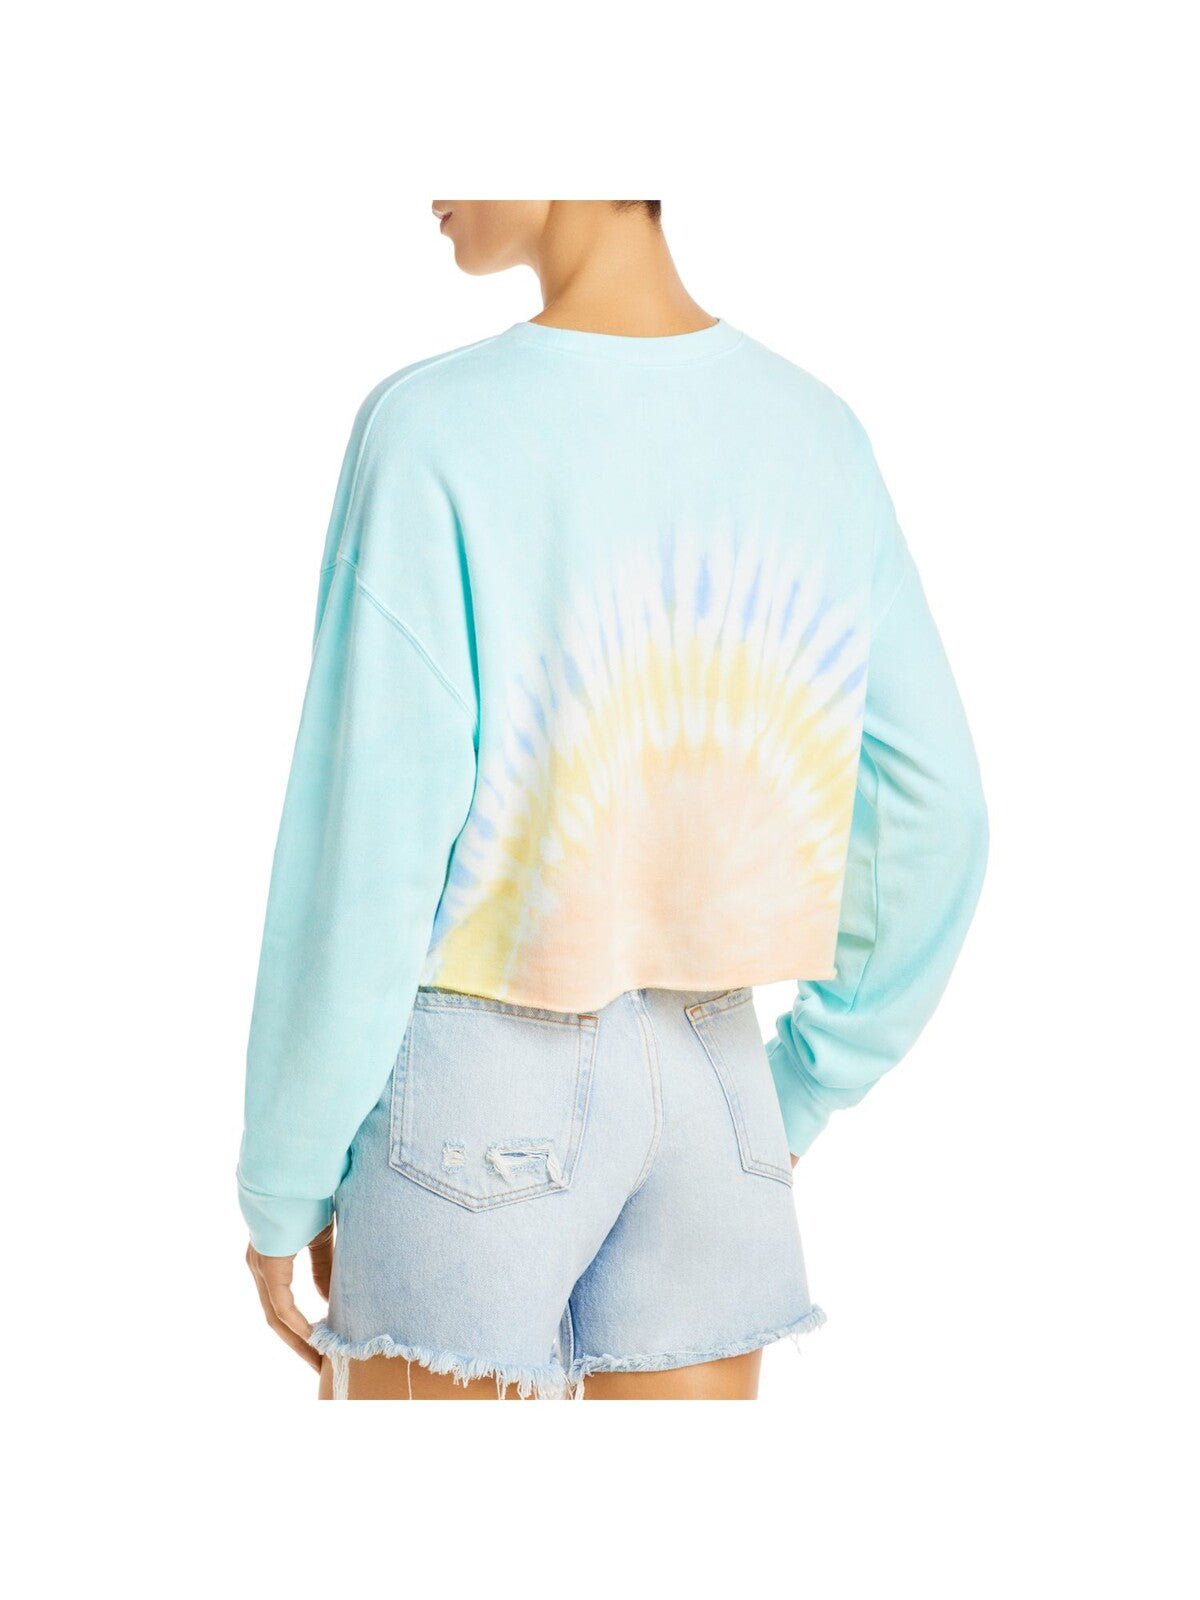 WSLY Womens Light Blue Ribbed Embroidered Cropped Tie Dye Long Sleeve Crew Neck Sweatshirt L